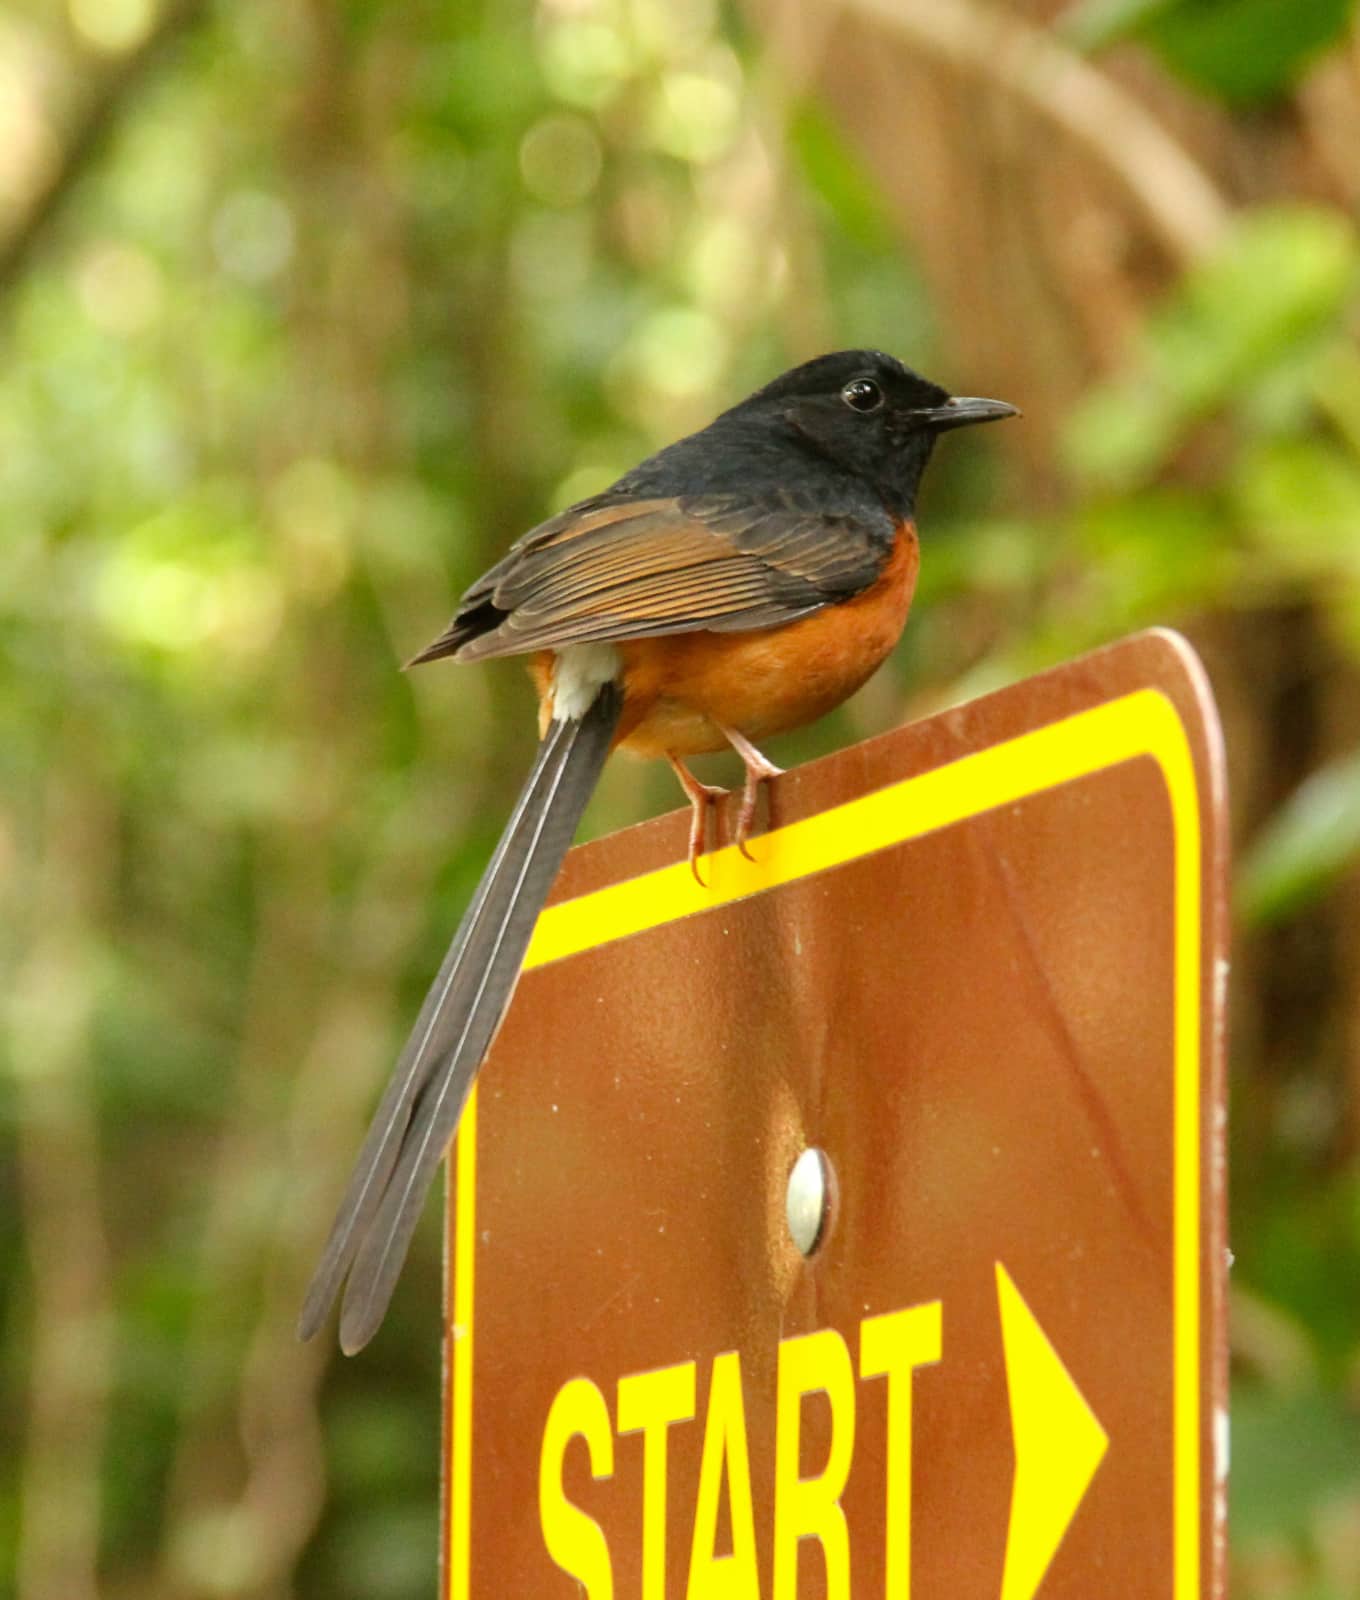 Small black and orange feathered bird perched on trail sign